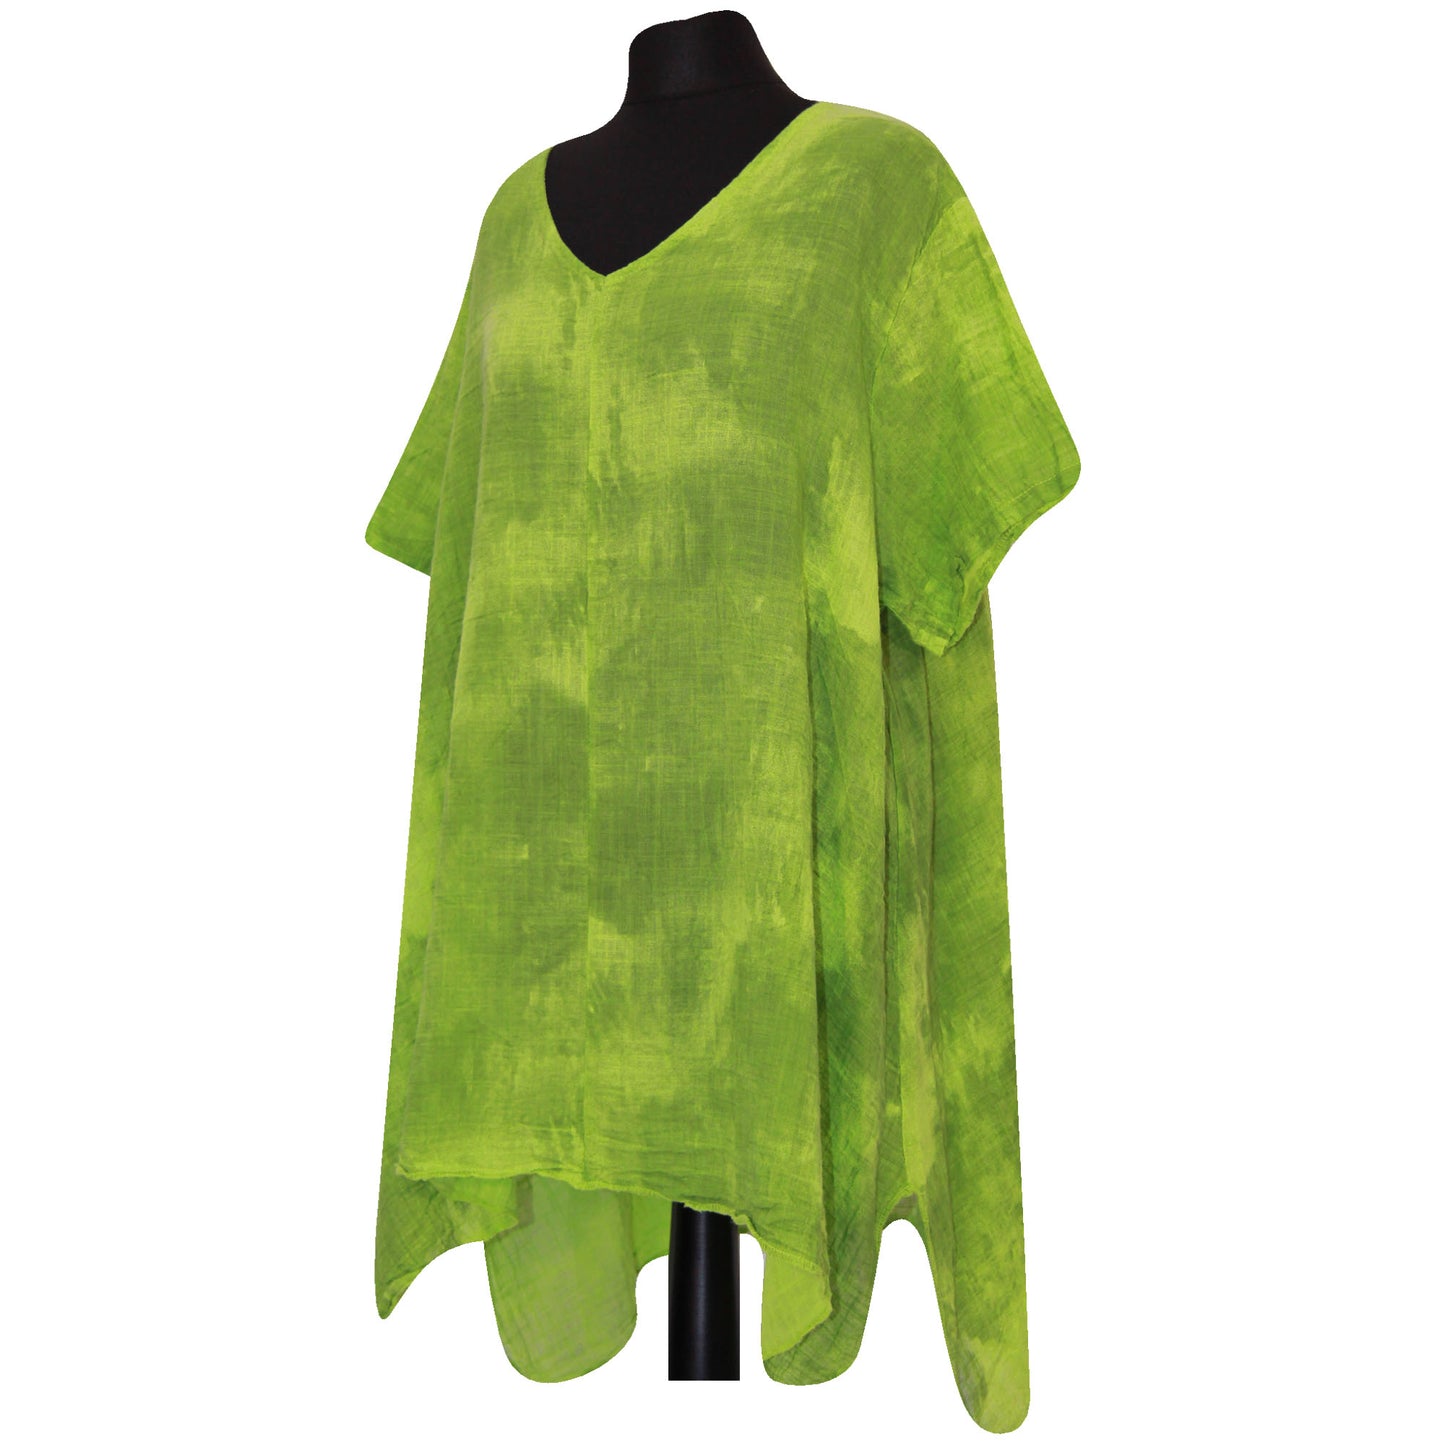 Italian Charm: Women's Quirky Tie Dye Cold Wash Top